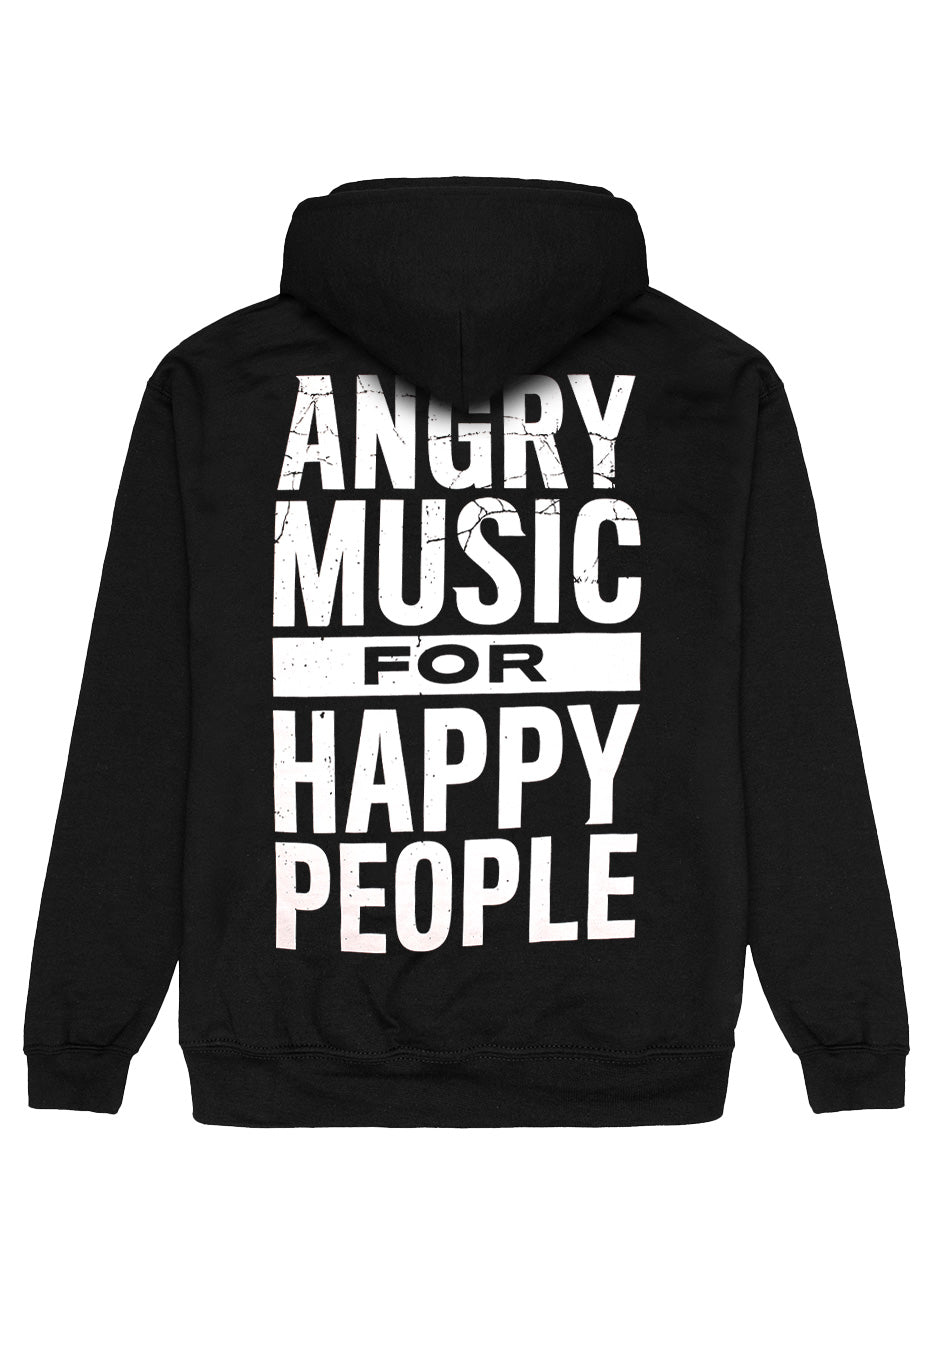 August Burns Red - Angry Music - Hoodie